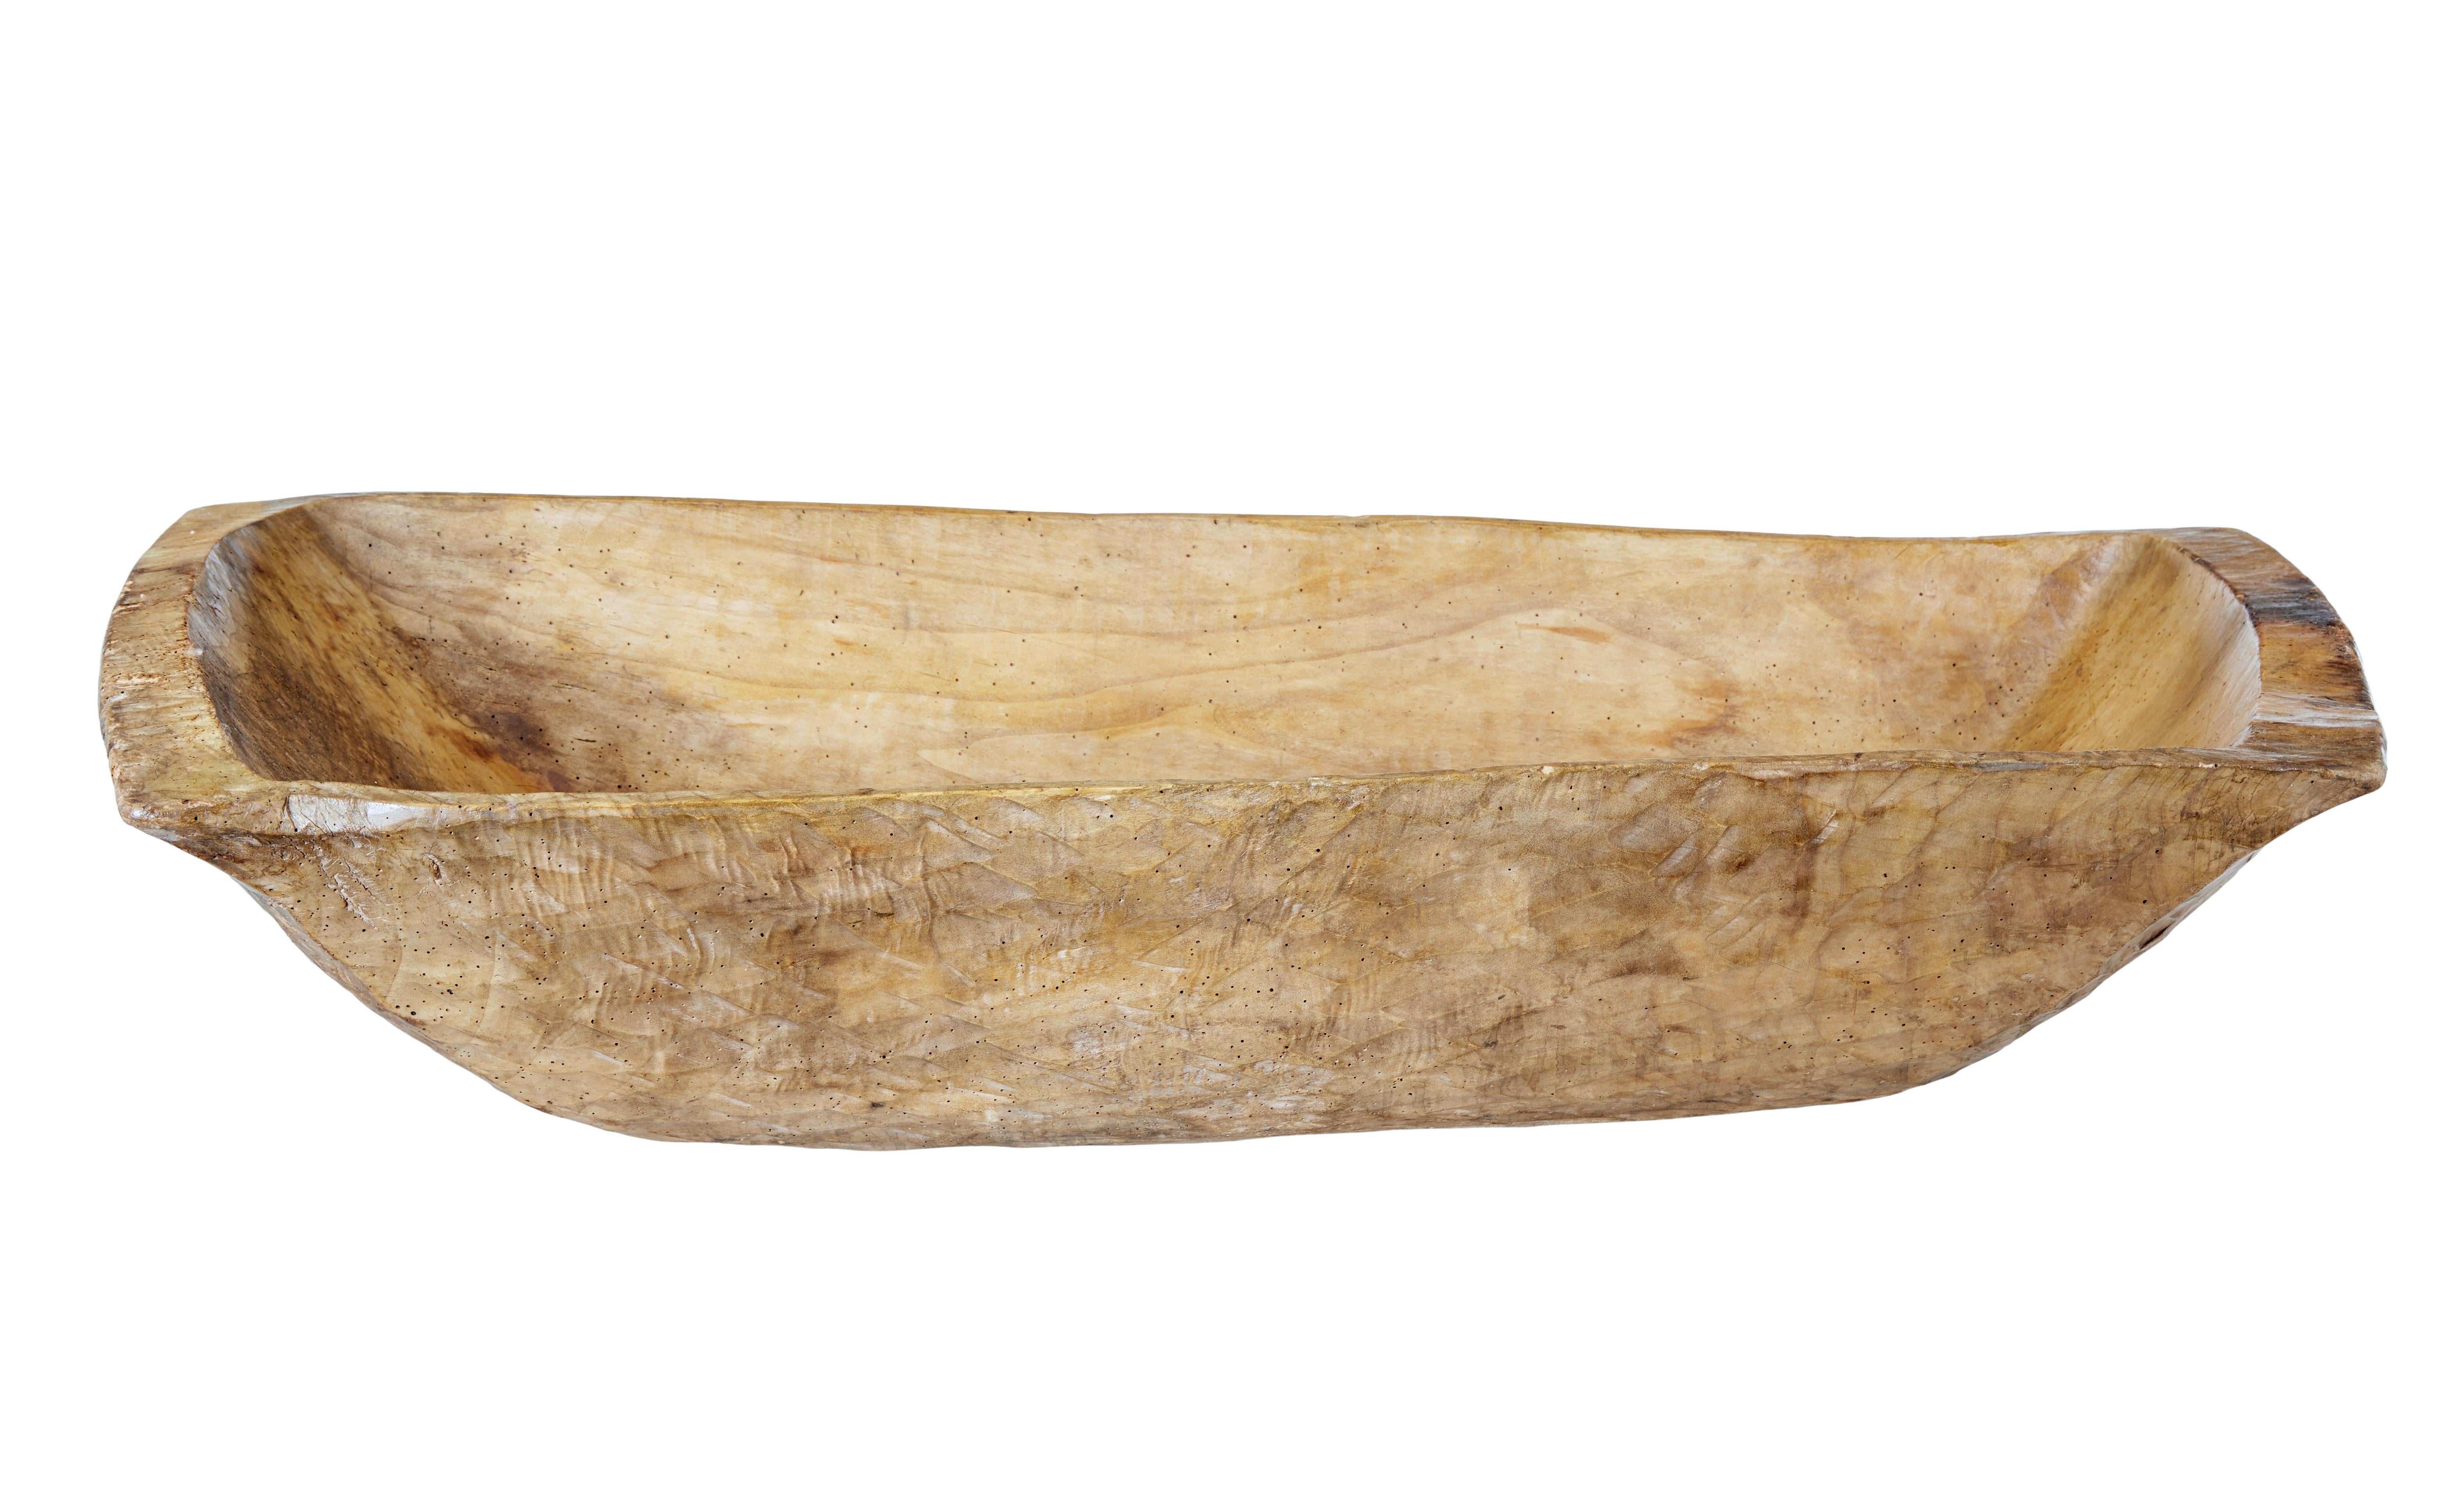 Early 20th century adzed food vessel circa 1900.

Here we have a rustic made food vessel, usually made for feeding animals in eastern Europe.  Hand carved from a solid tree trunk using an adze technique.

Our example has been fully treated and